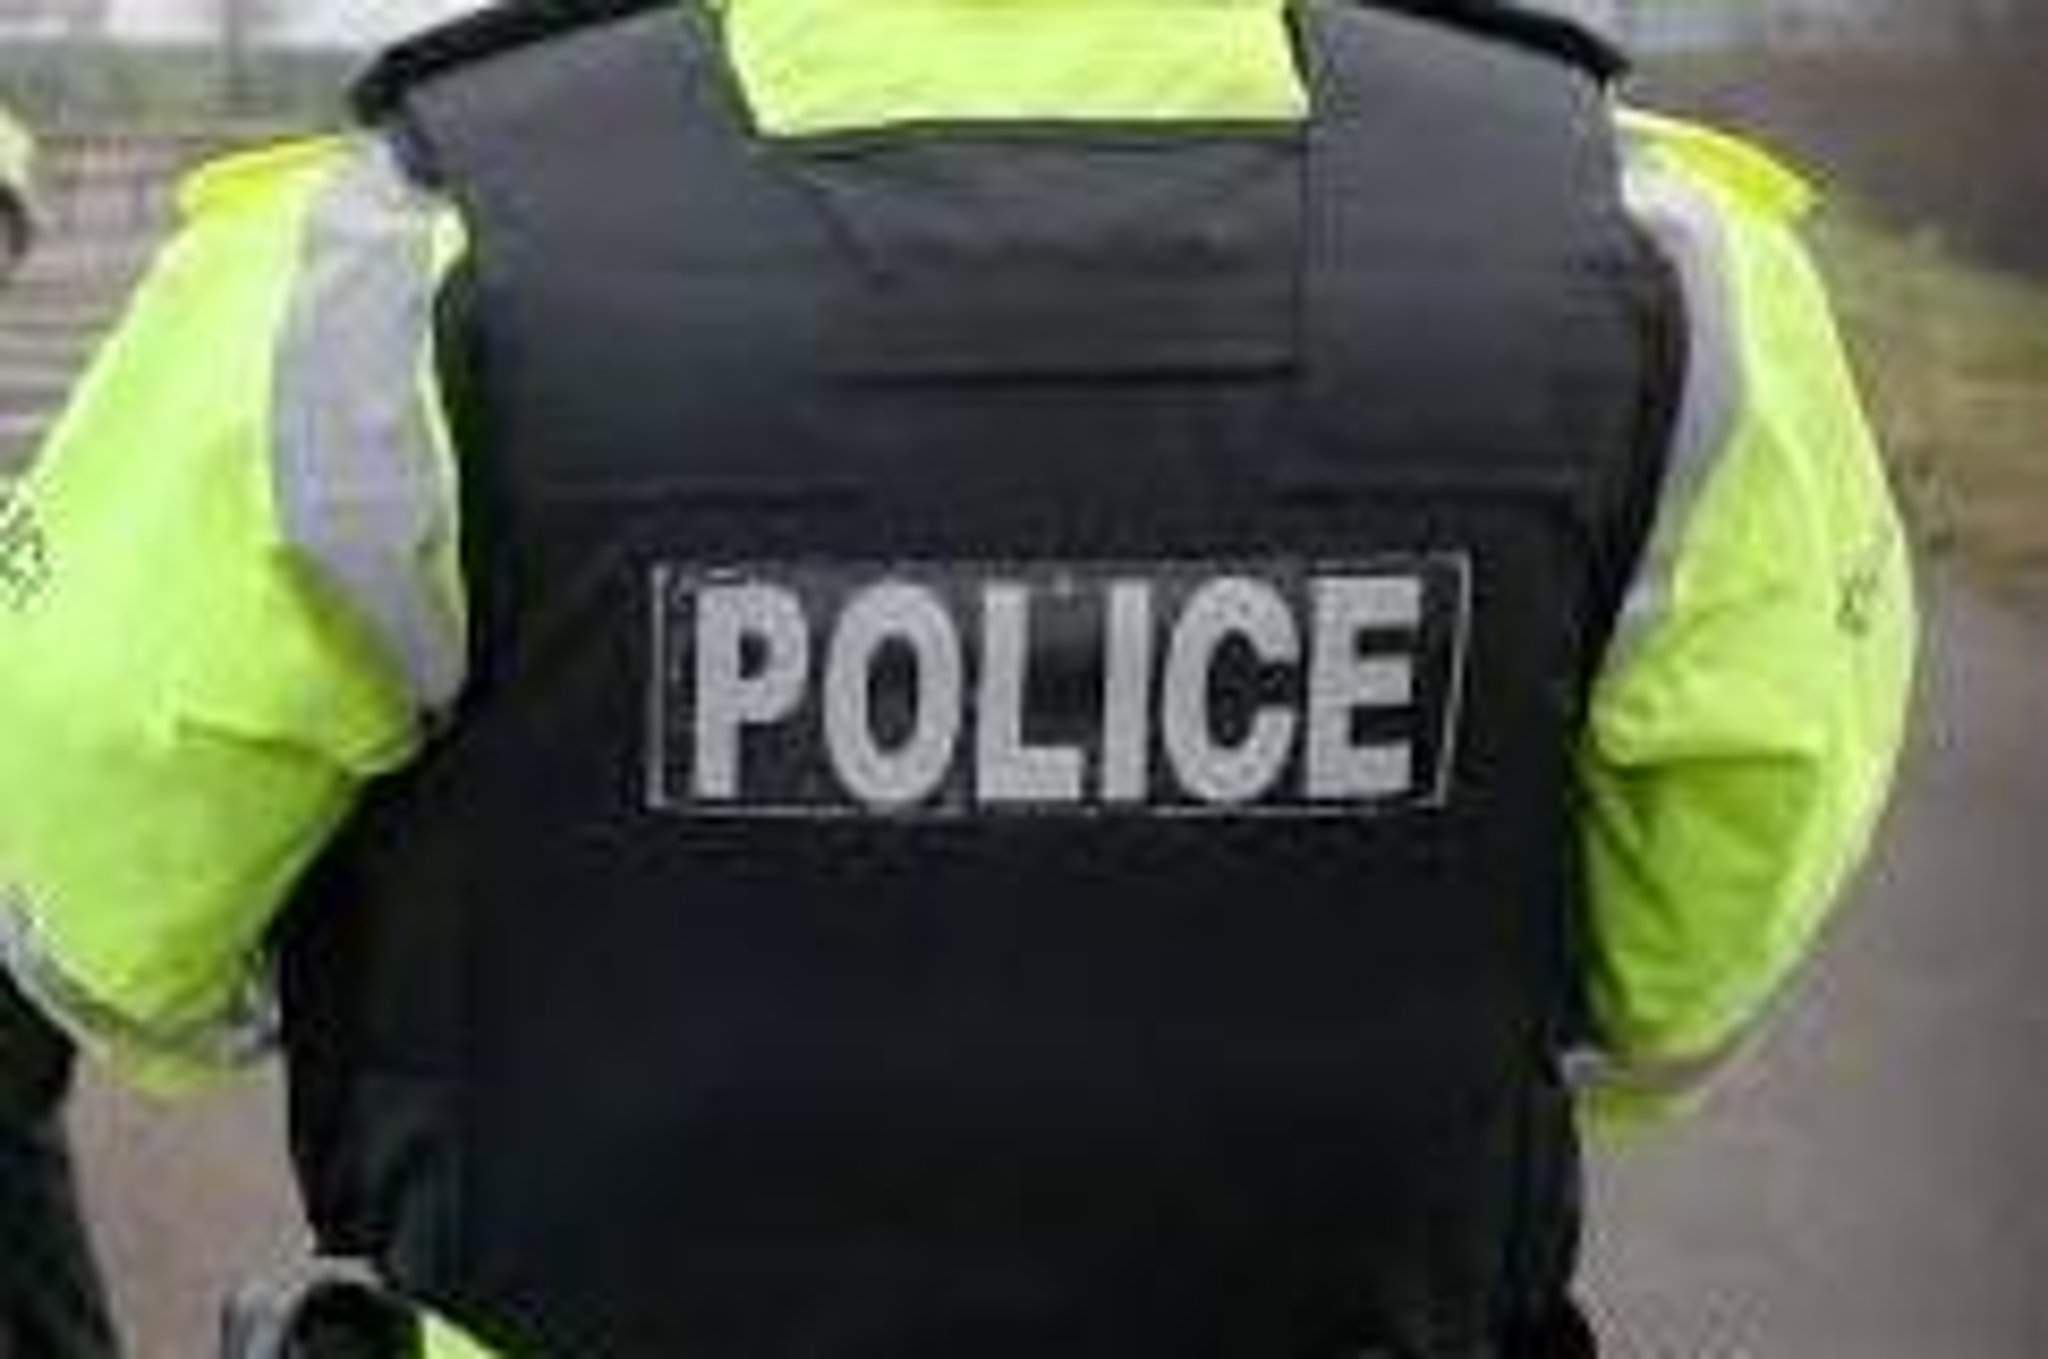 Shotgun and ammunition discovered in NI town - appeal for information